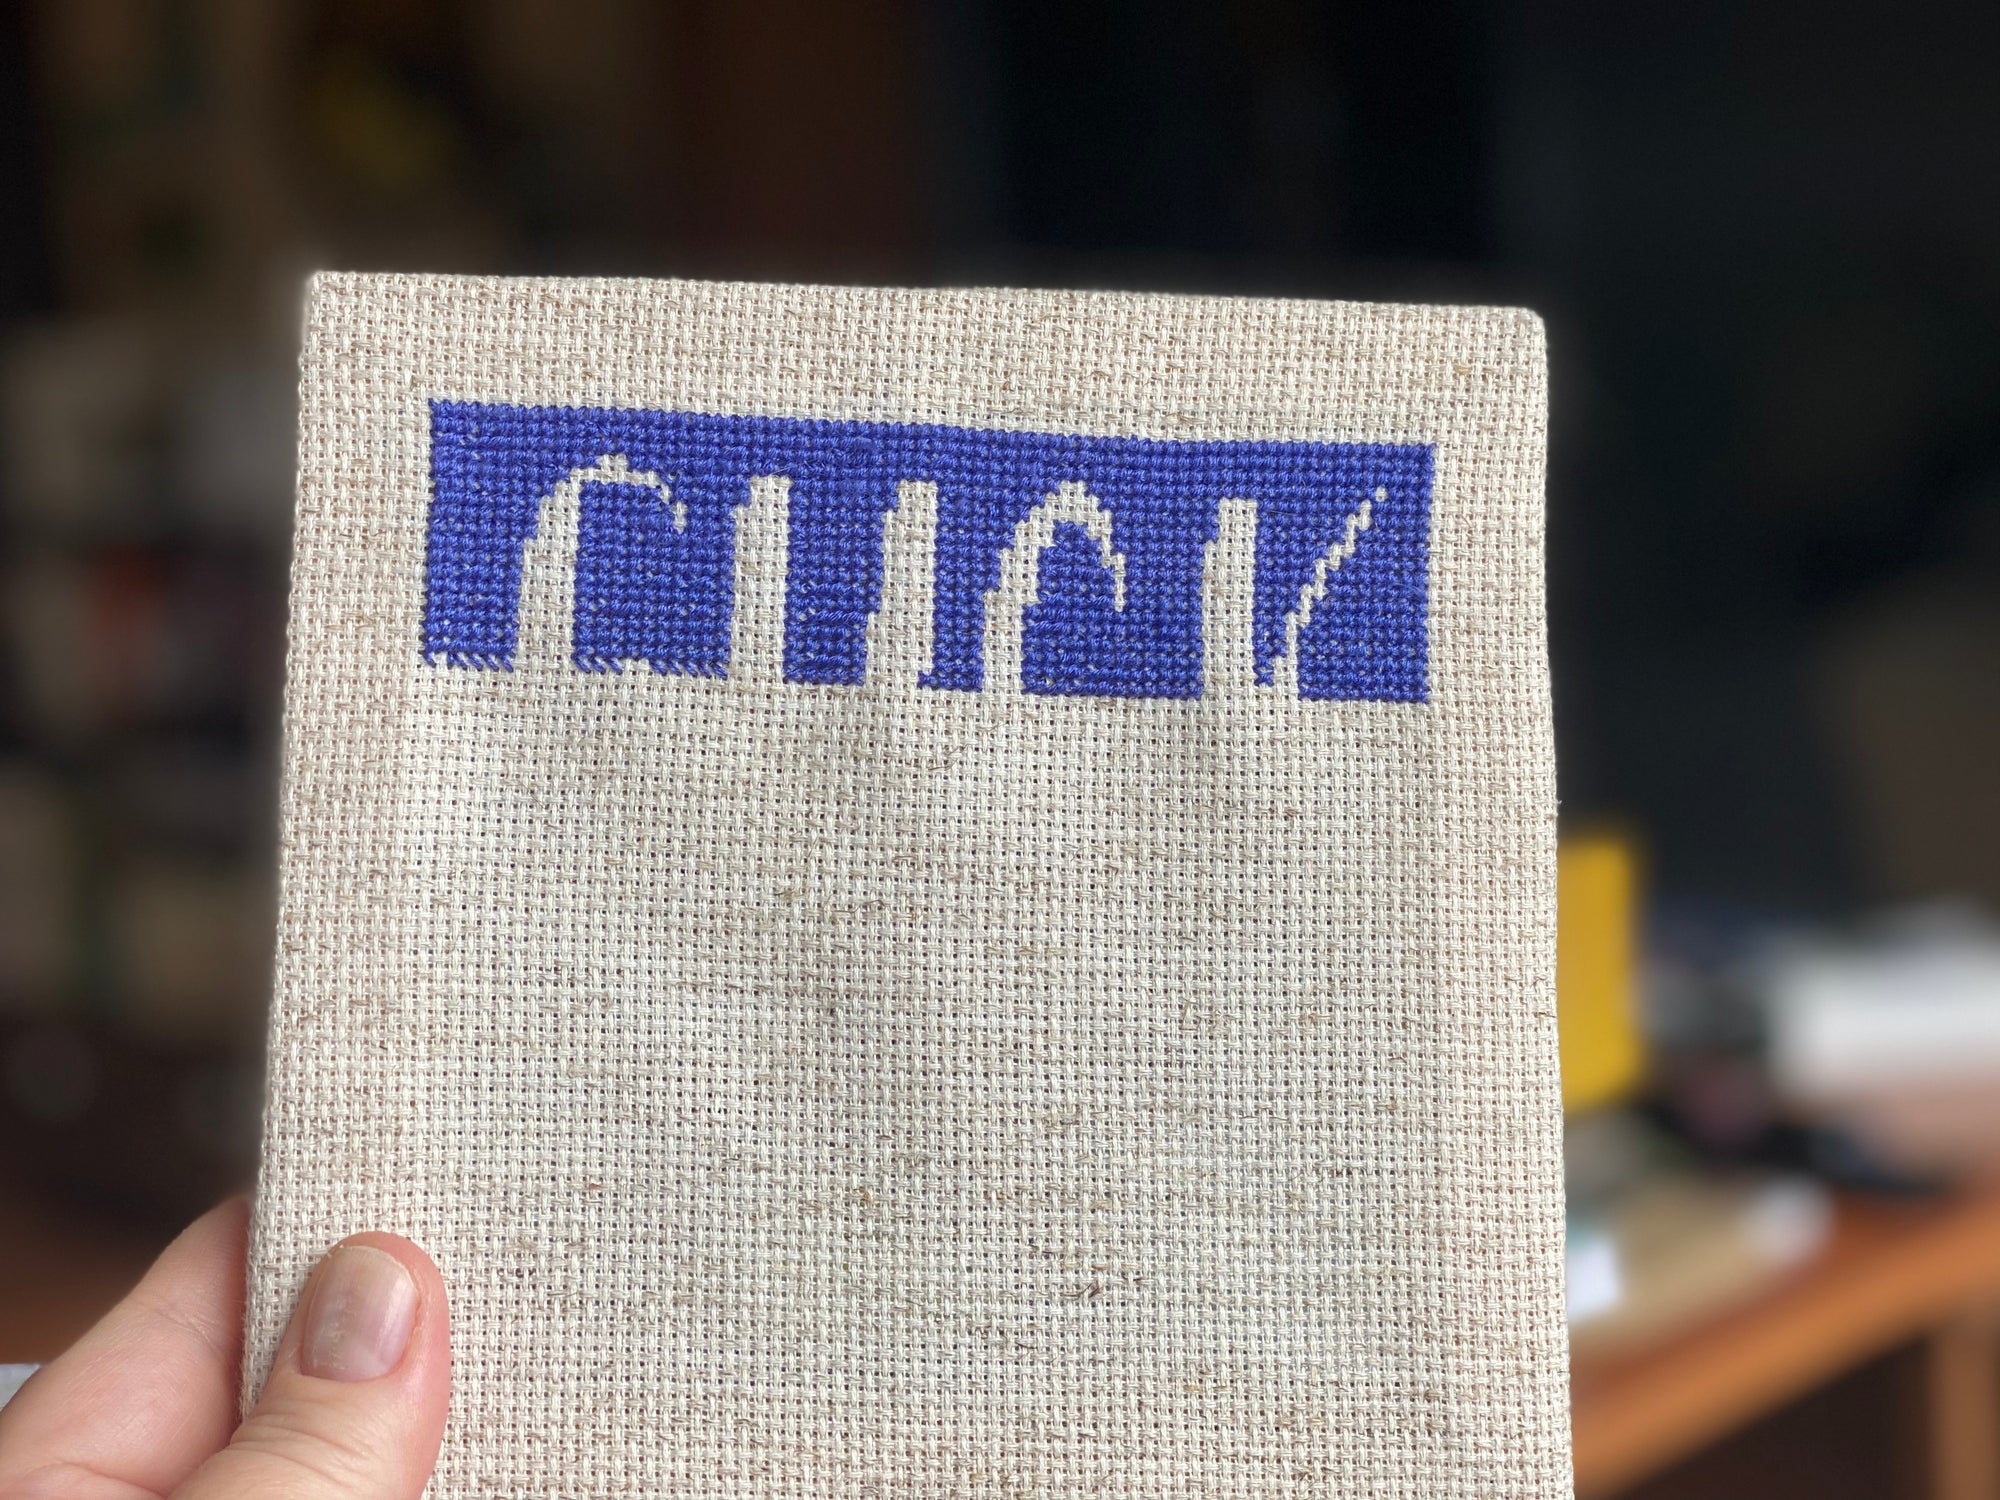 Partially completed cross stitch kit that will says "Fuck This" Stitched in dark purple on an off-white canvas. 